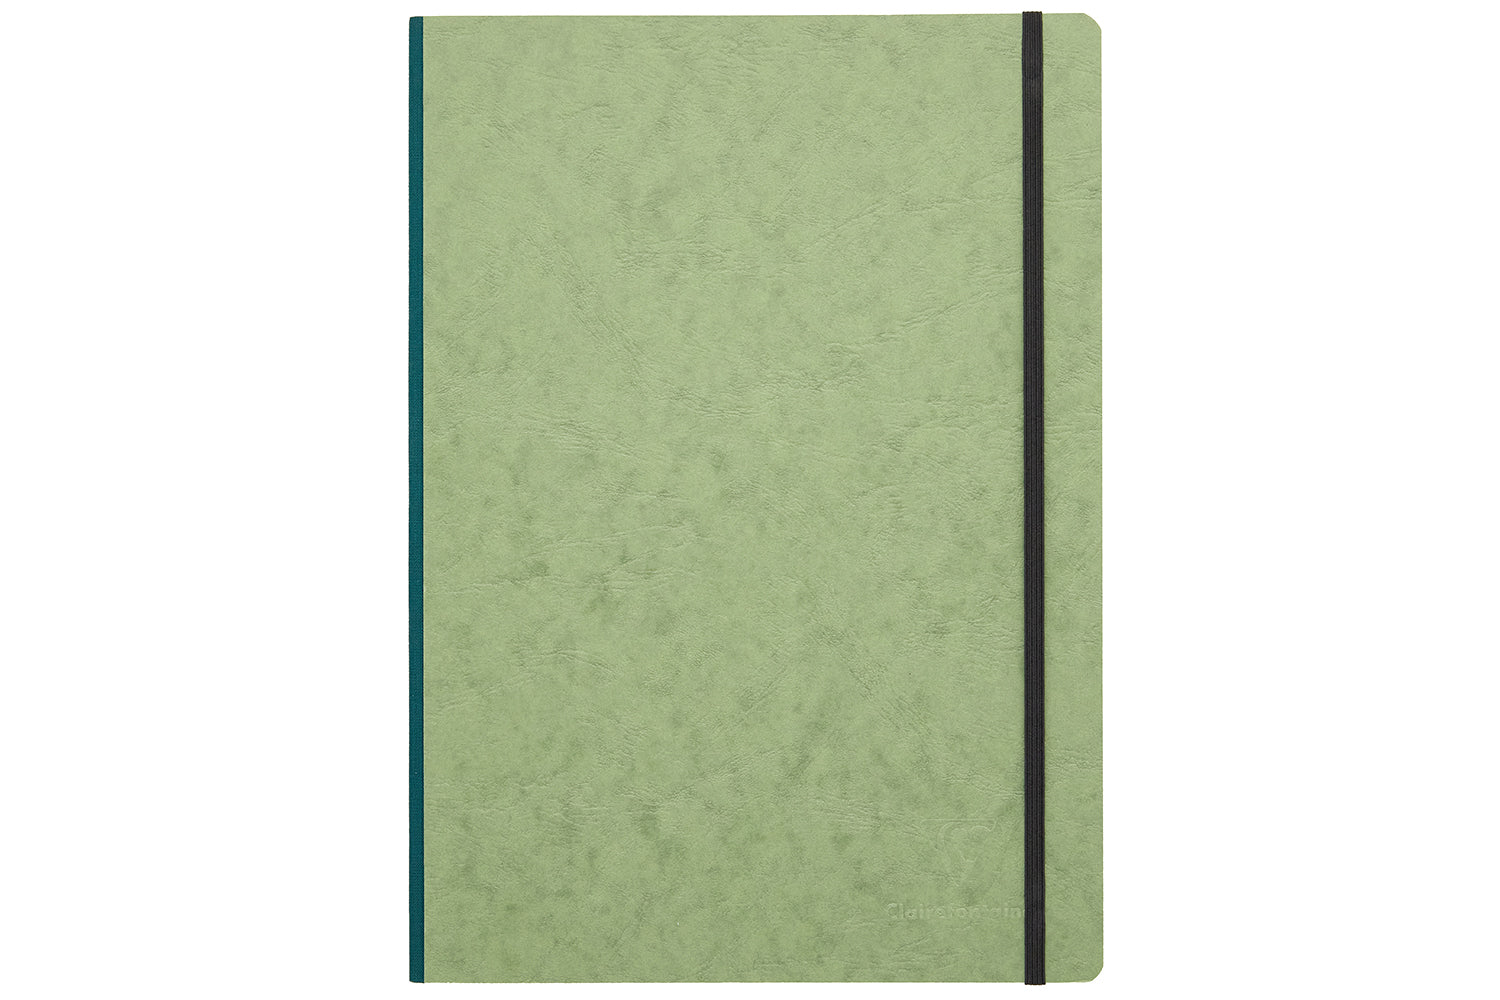 Clairefontaine Staplebound Drawing Book A4 Plain Ruled. - Clairefon